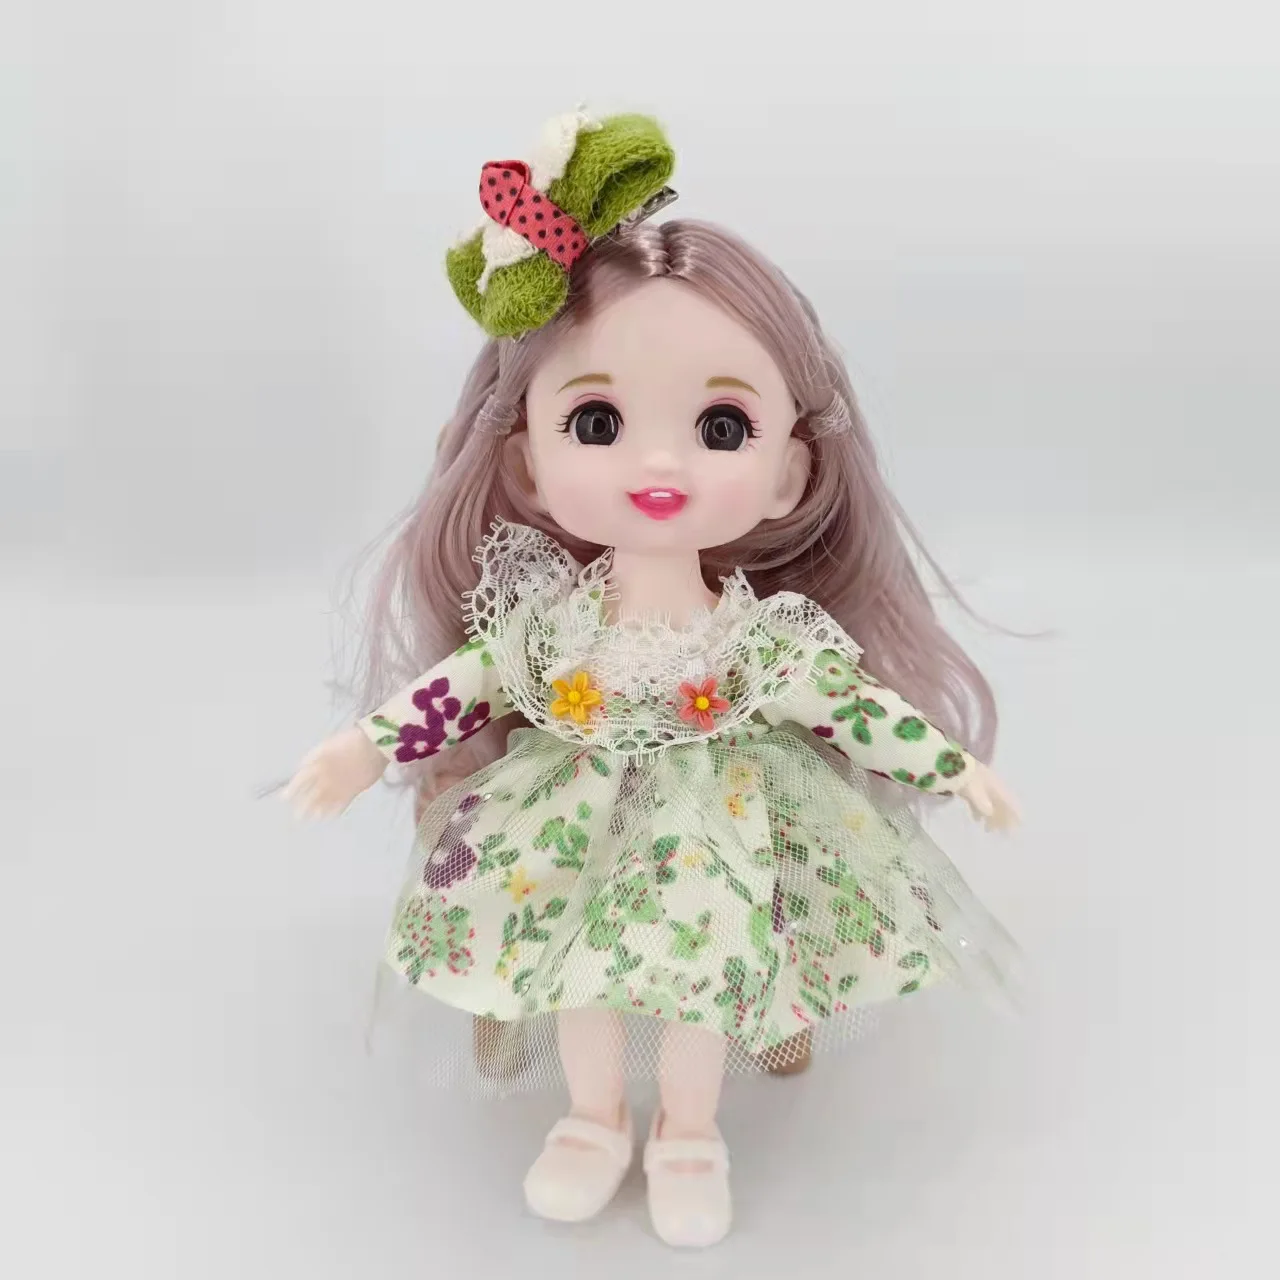 

8 Points 16cm Cute Expression BJD Doll Clothes Set Can Be Changed Into 13 Joint Movable 3D Eyes Princess Girl Costume Toy Gift